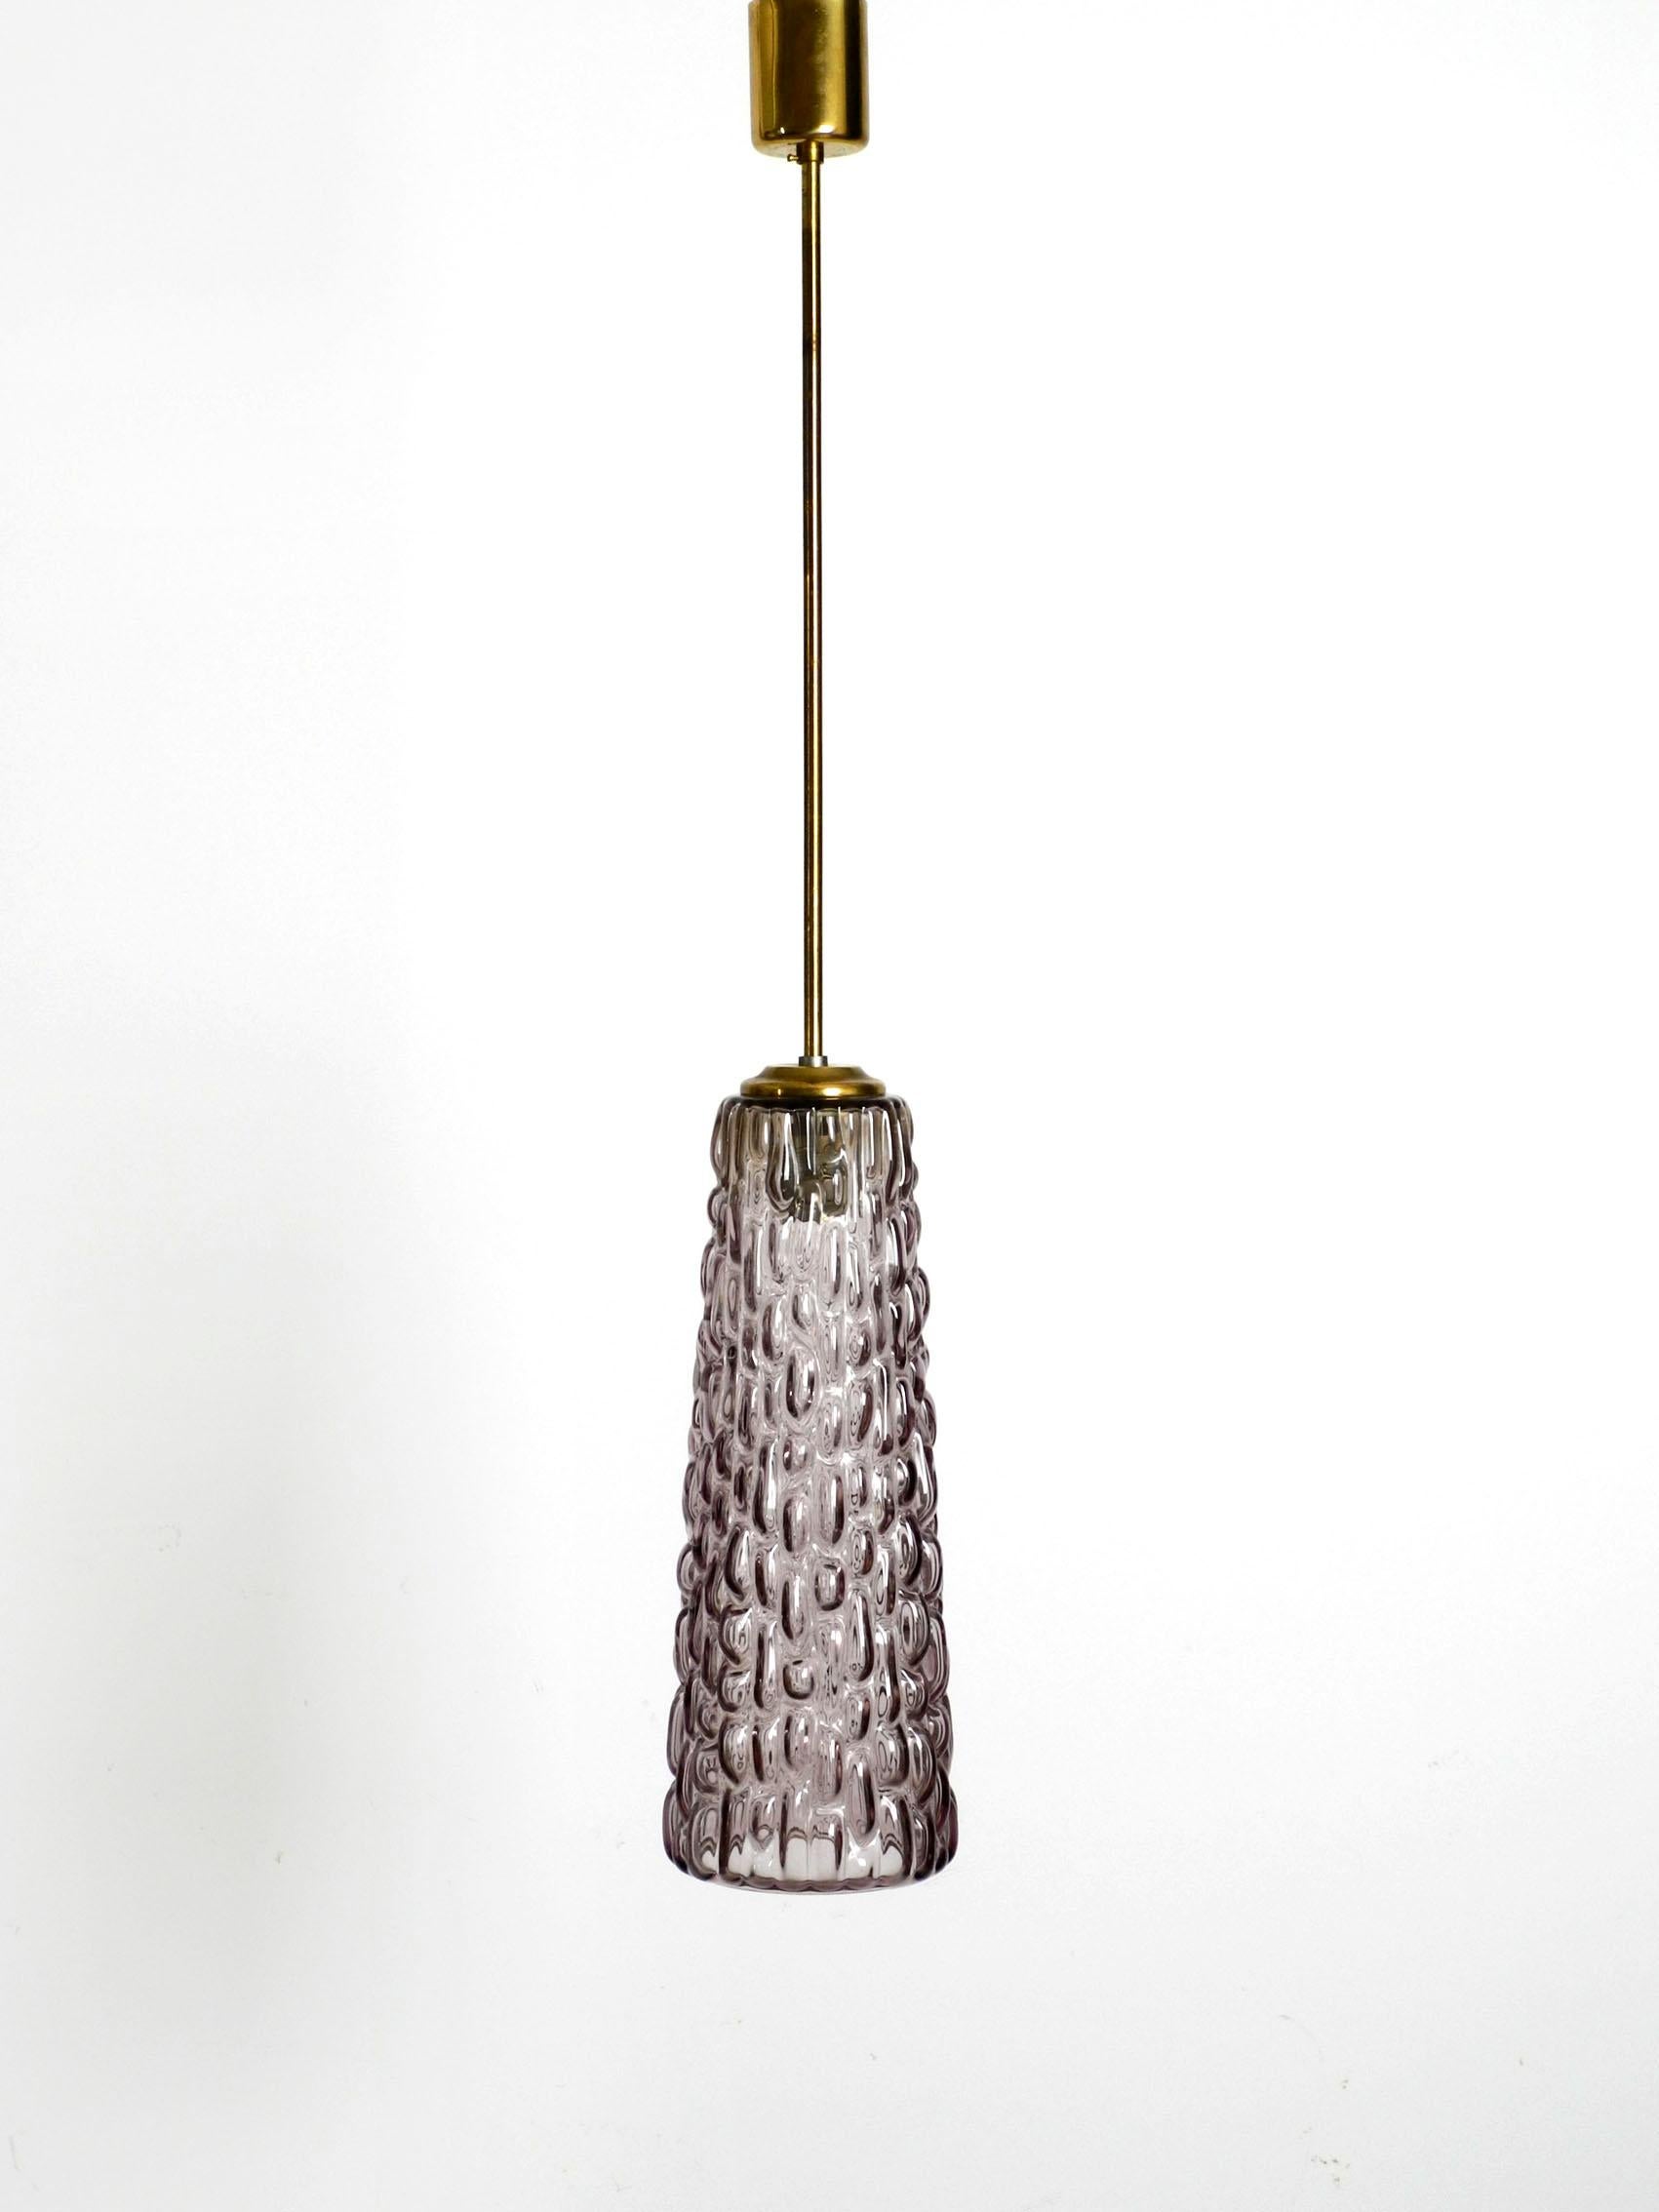 Extremely rare heavy long midcentury glass pendant lamp by Rupert Nikoll. Made in Vienna Austria.
Beautiful high quality bottom closed glass shade made of thick heavy glass in light purple- lilac with an abstract pattern. Long rod and canopy are